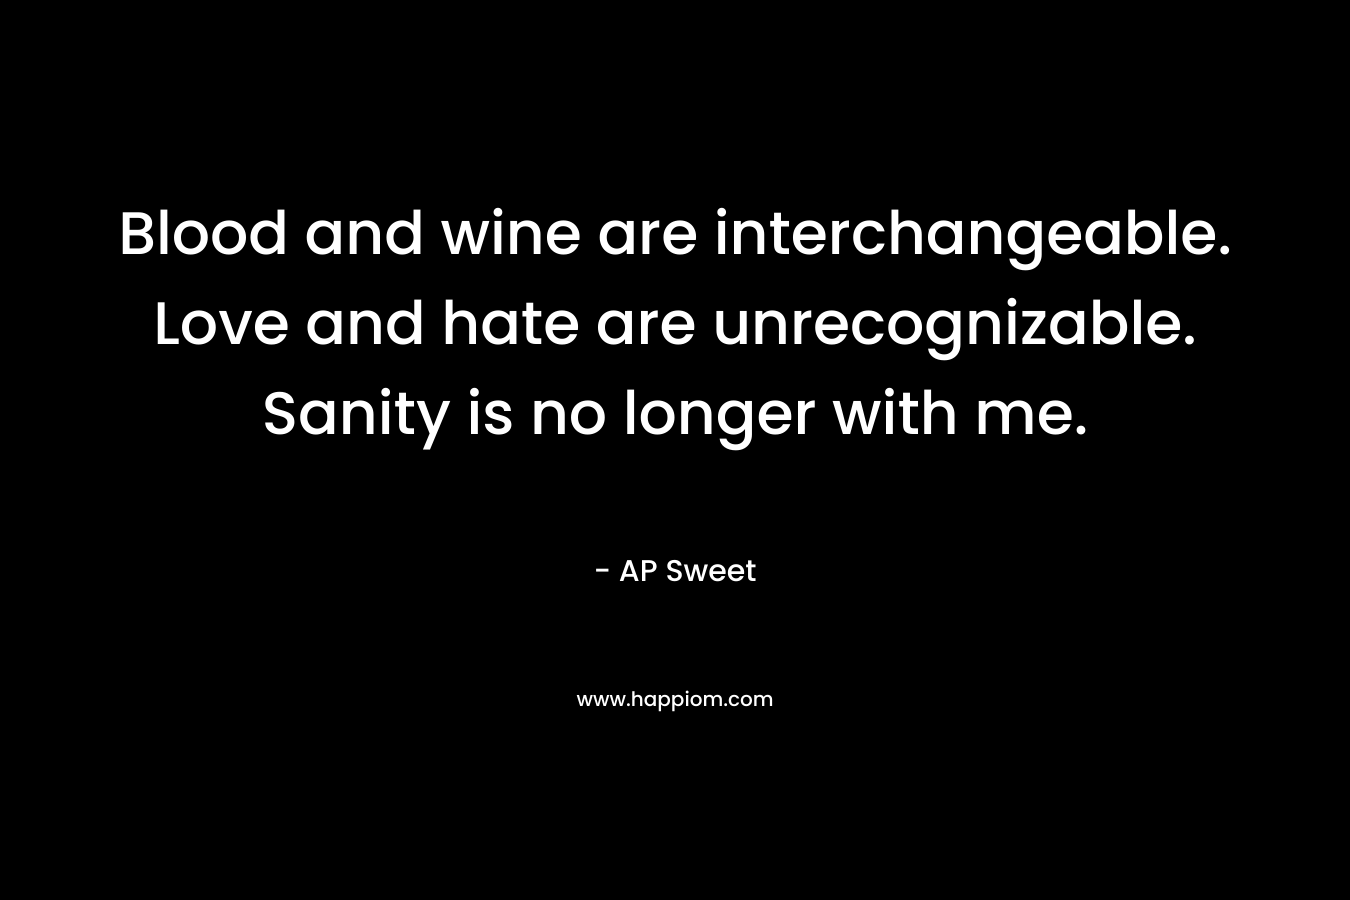 Blood and wine are interchangeable. Love and hate are unrecognizable. Sanity is no longer with me. – AP Sweet